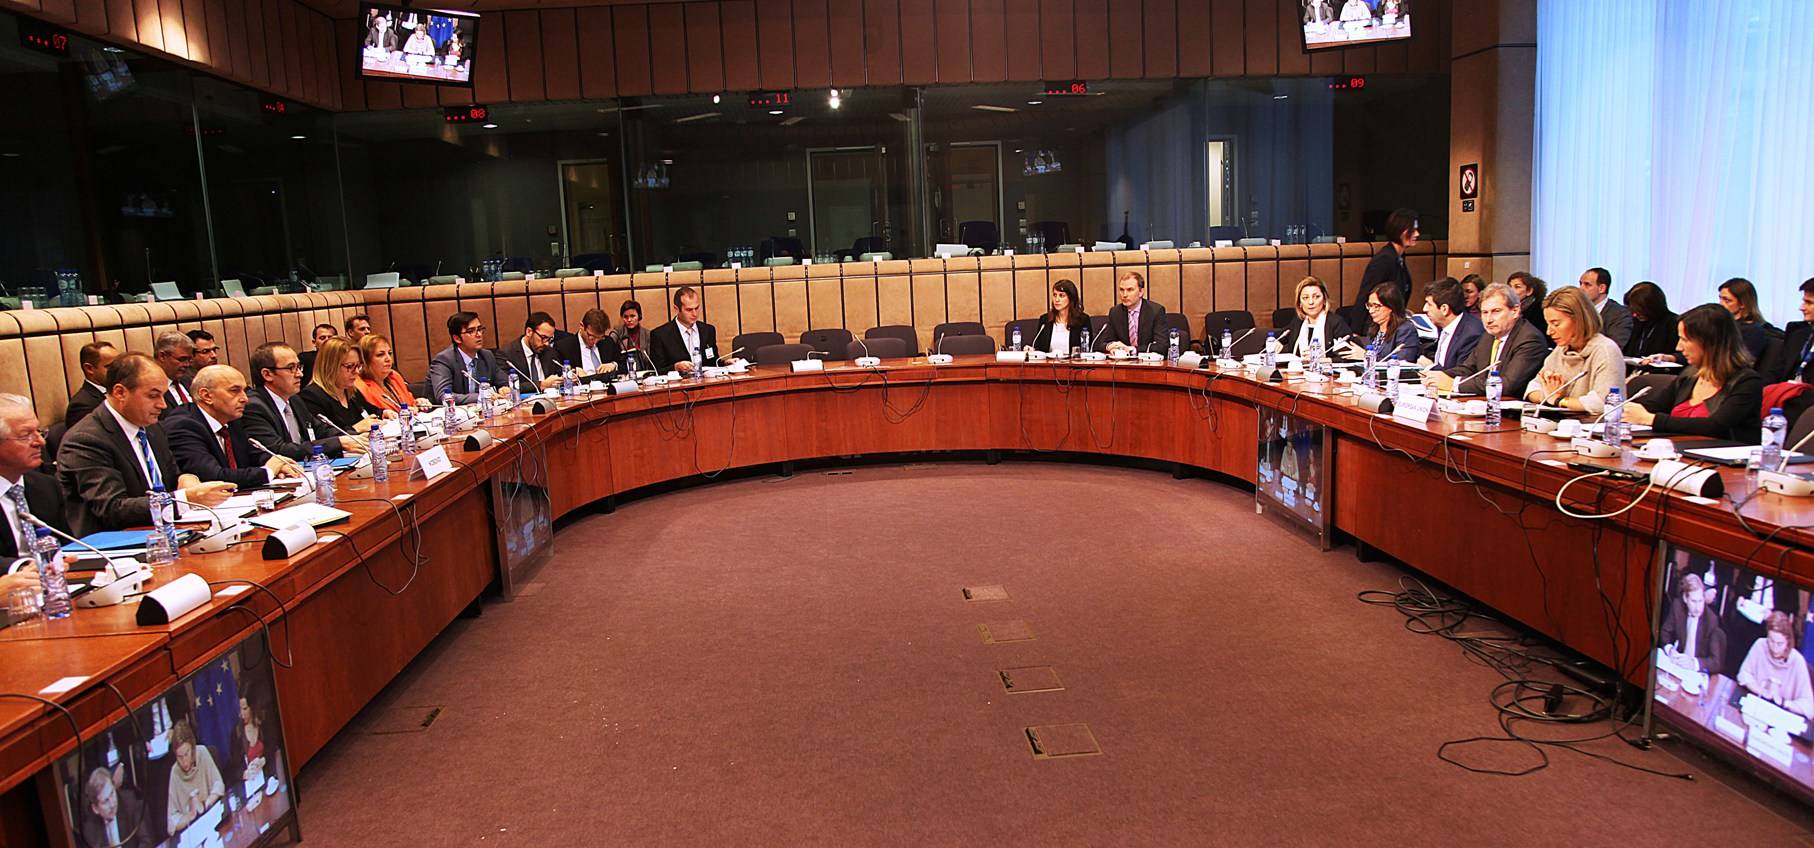 Meeting of the Stabilisation and Association Council between the EU and Kosovo